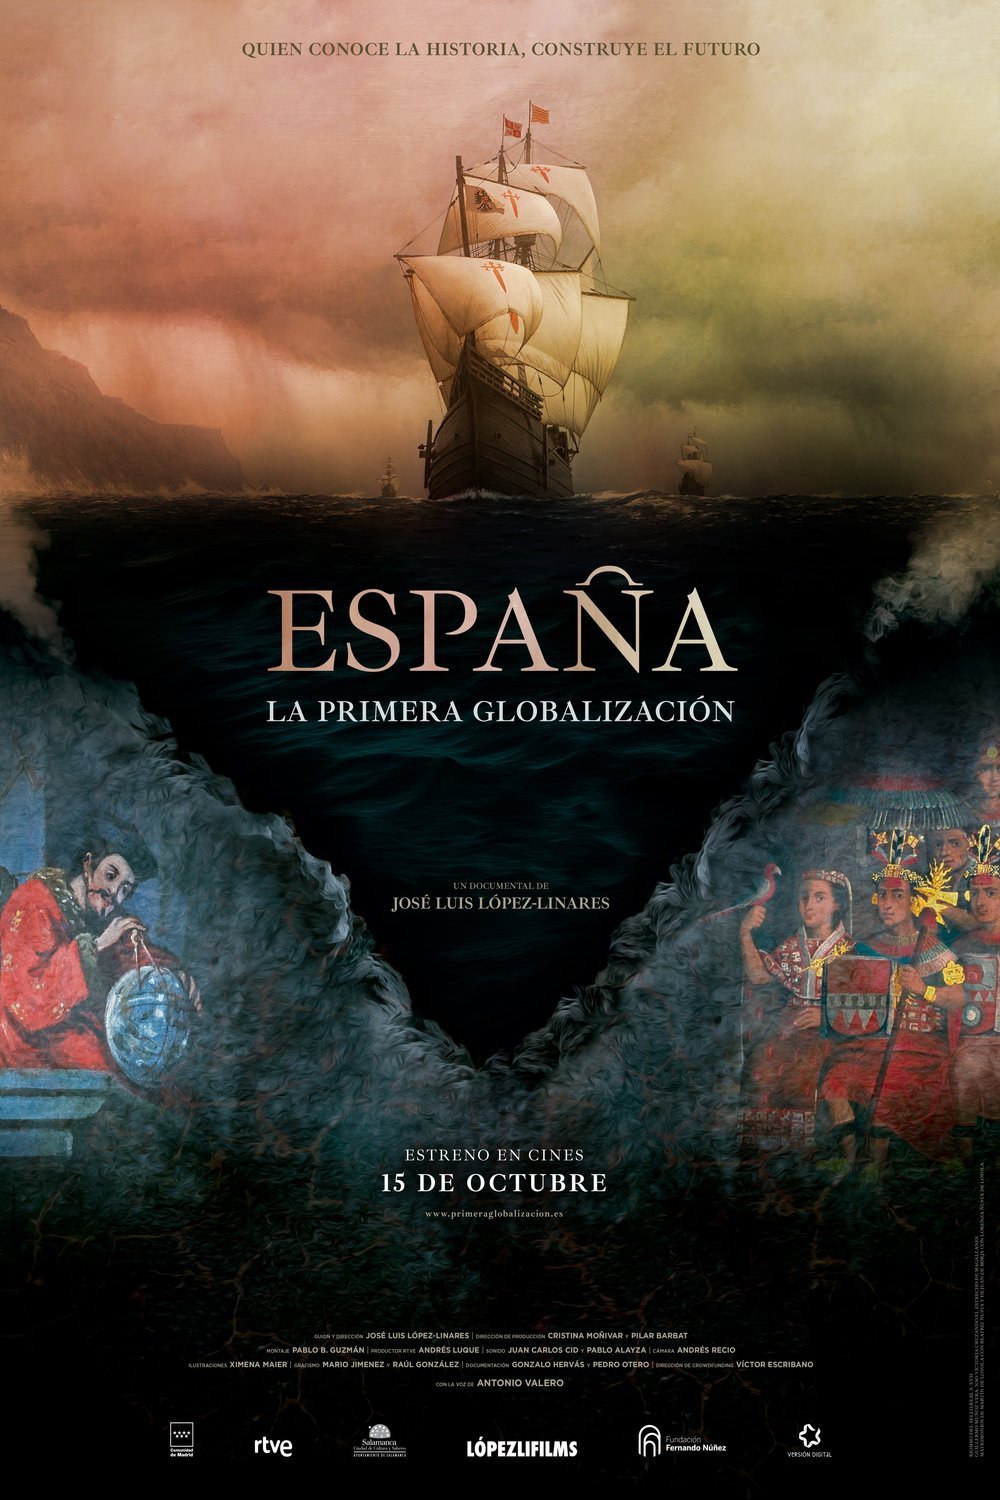 Poster of the movie Spain, the first Globalization